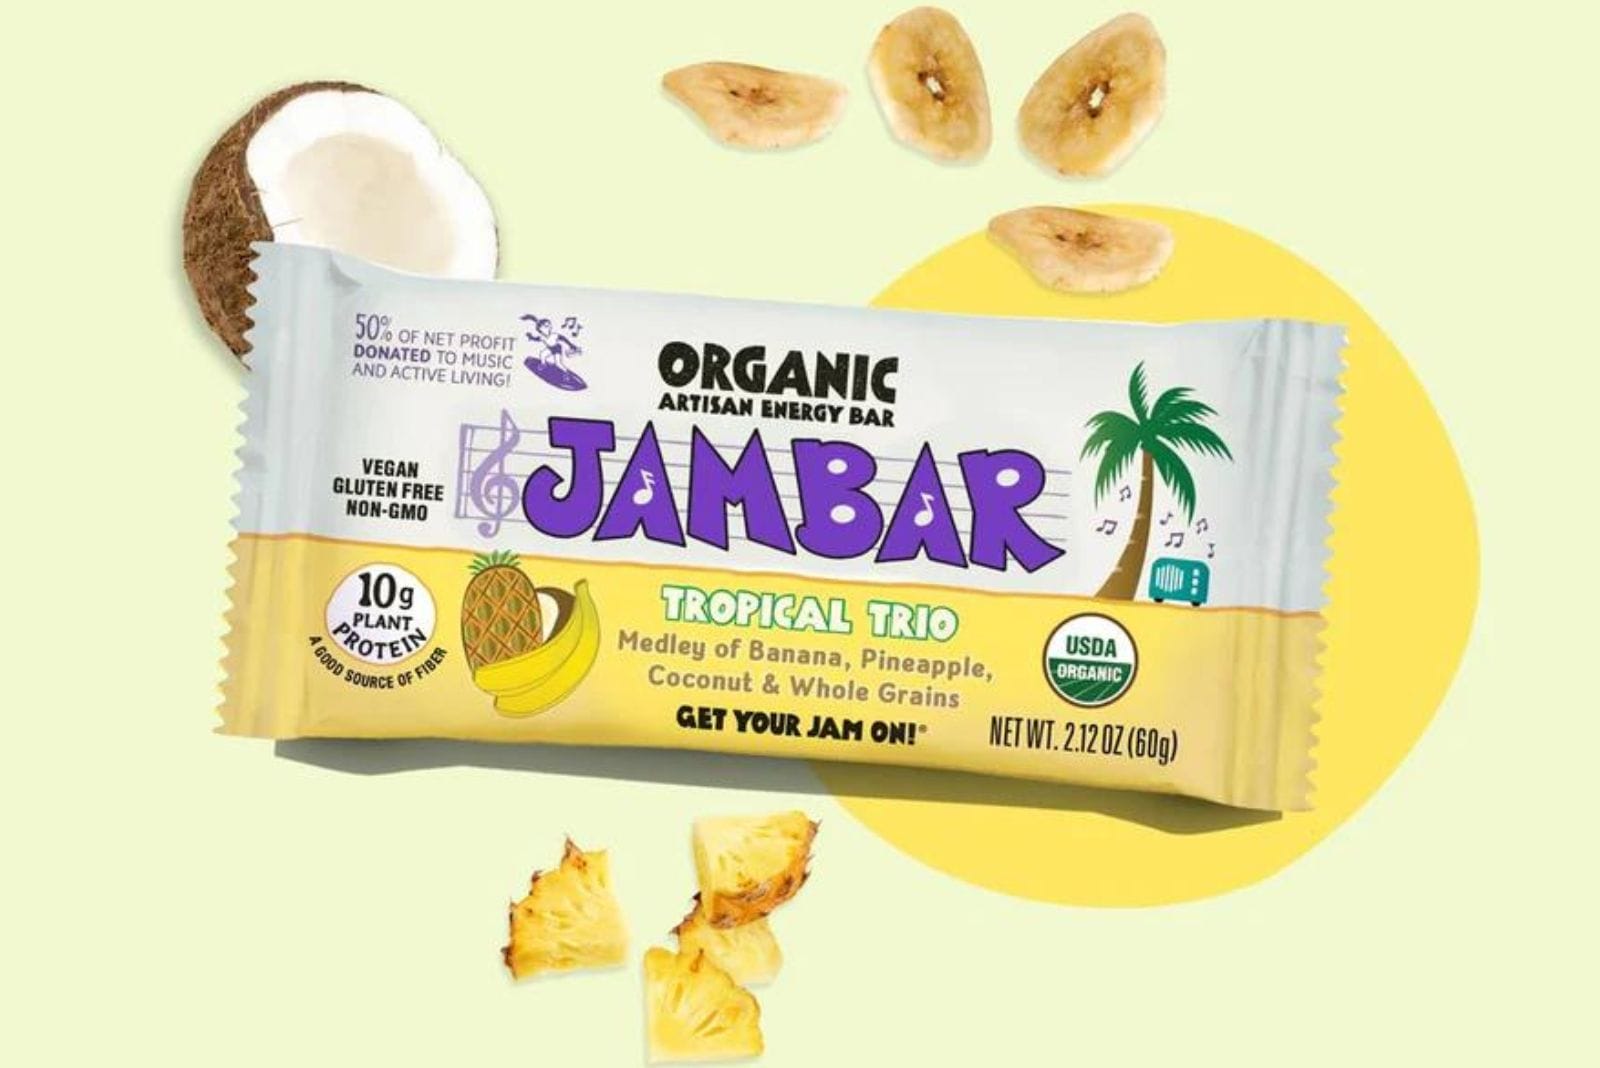 PHOTO OF JAMBAR TROPICAL TRIO PACKAGE ON TOP OF COCONUT, BANANA AND PINEAPPLE PIECES